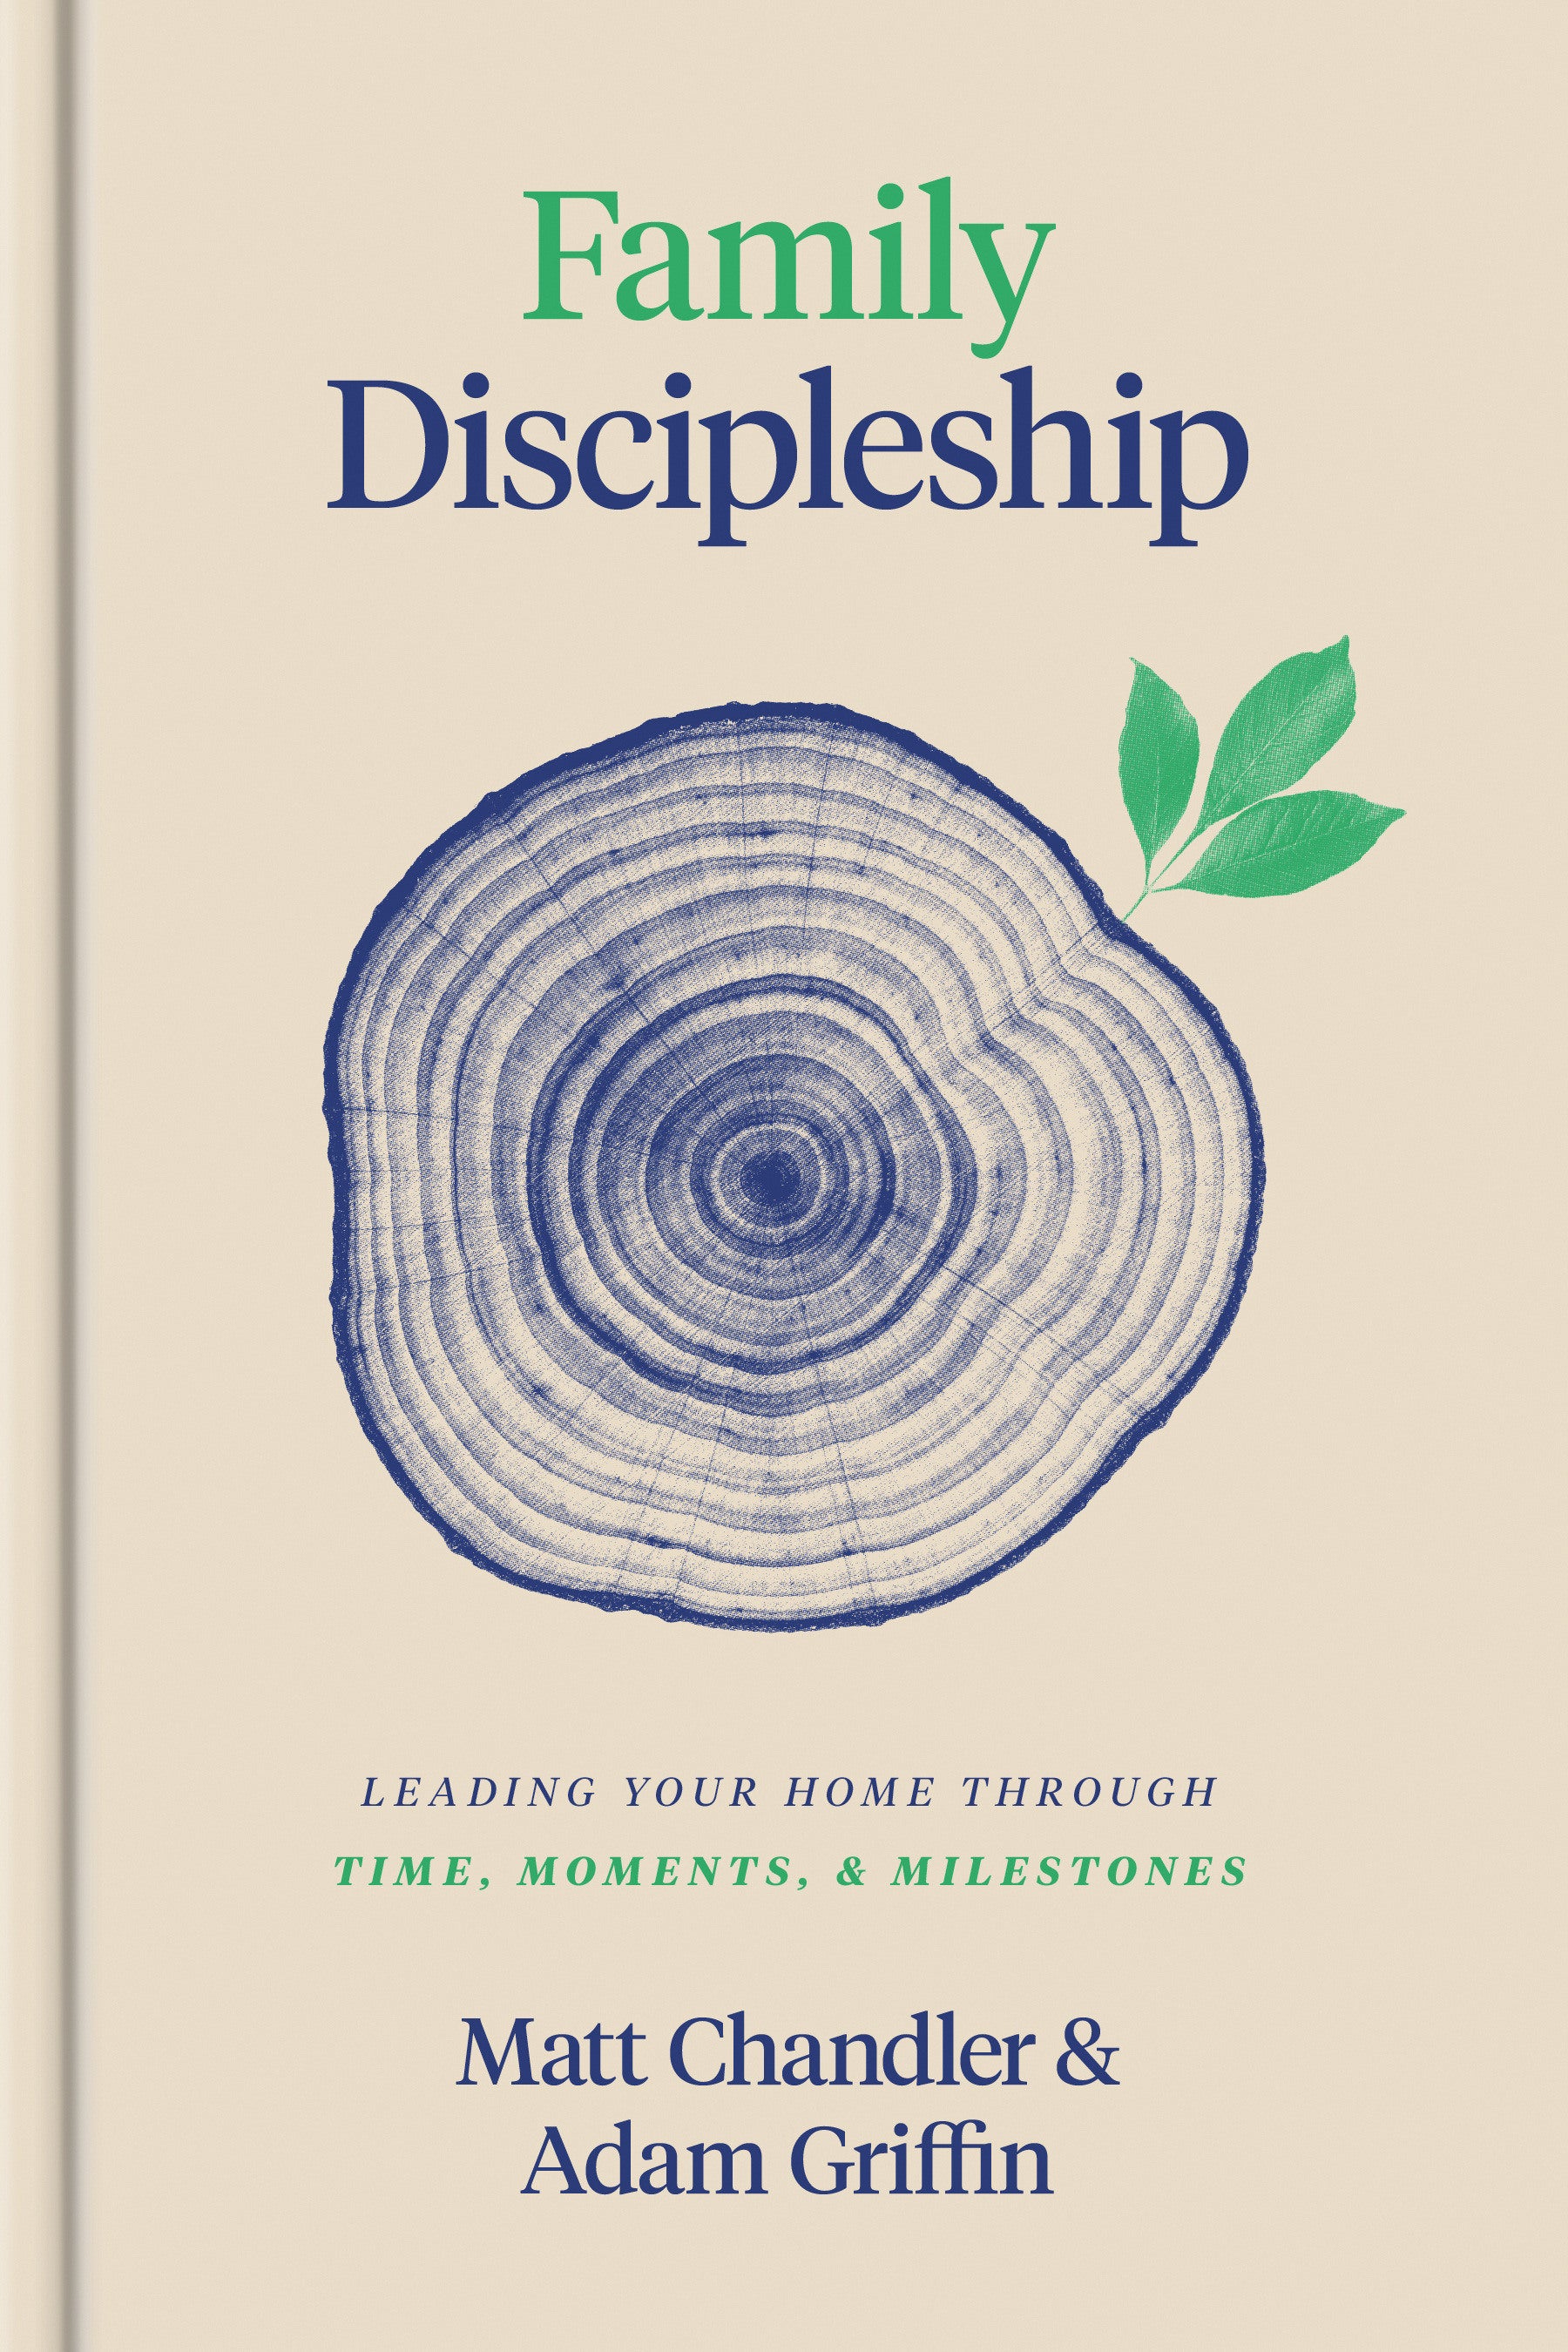 Image of Family Discipleship other